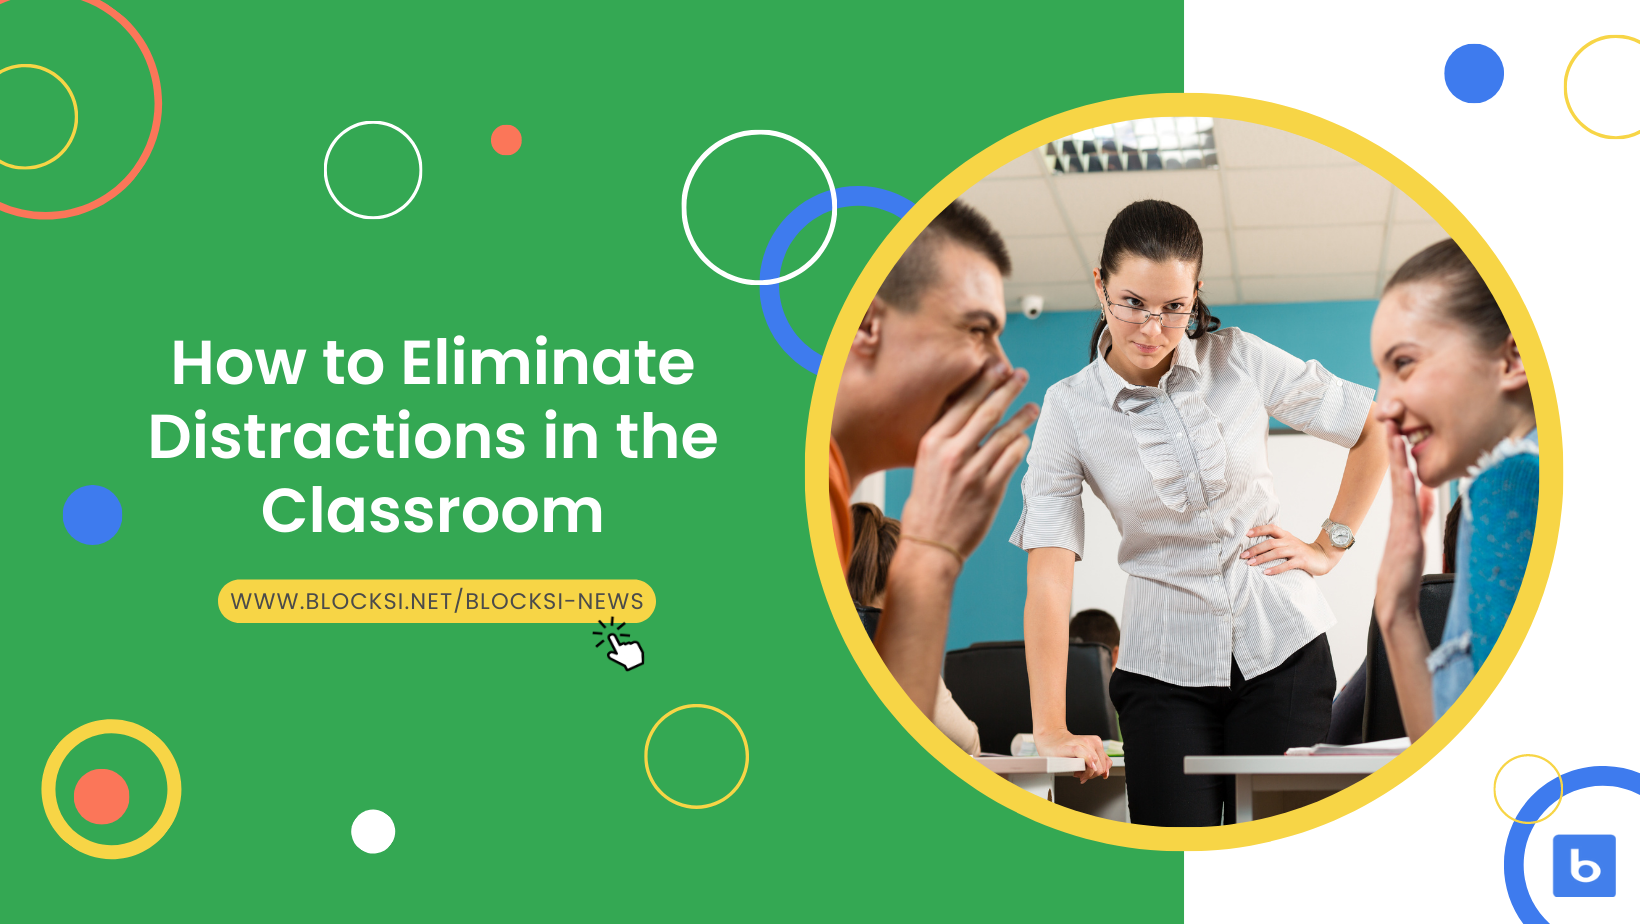 How to Eliminate Distractions in the Classroom